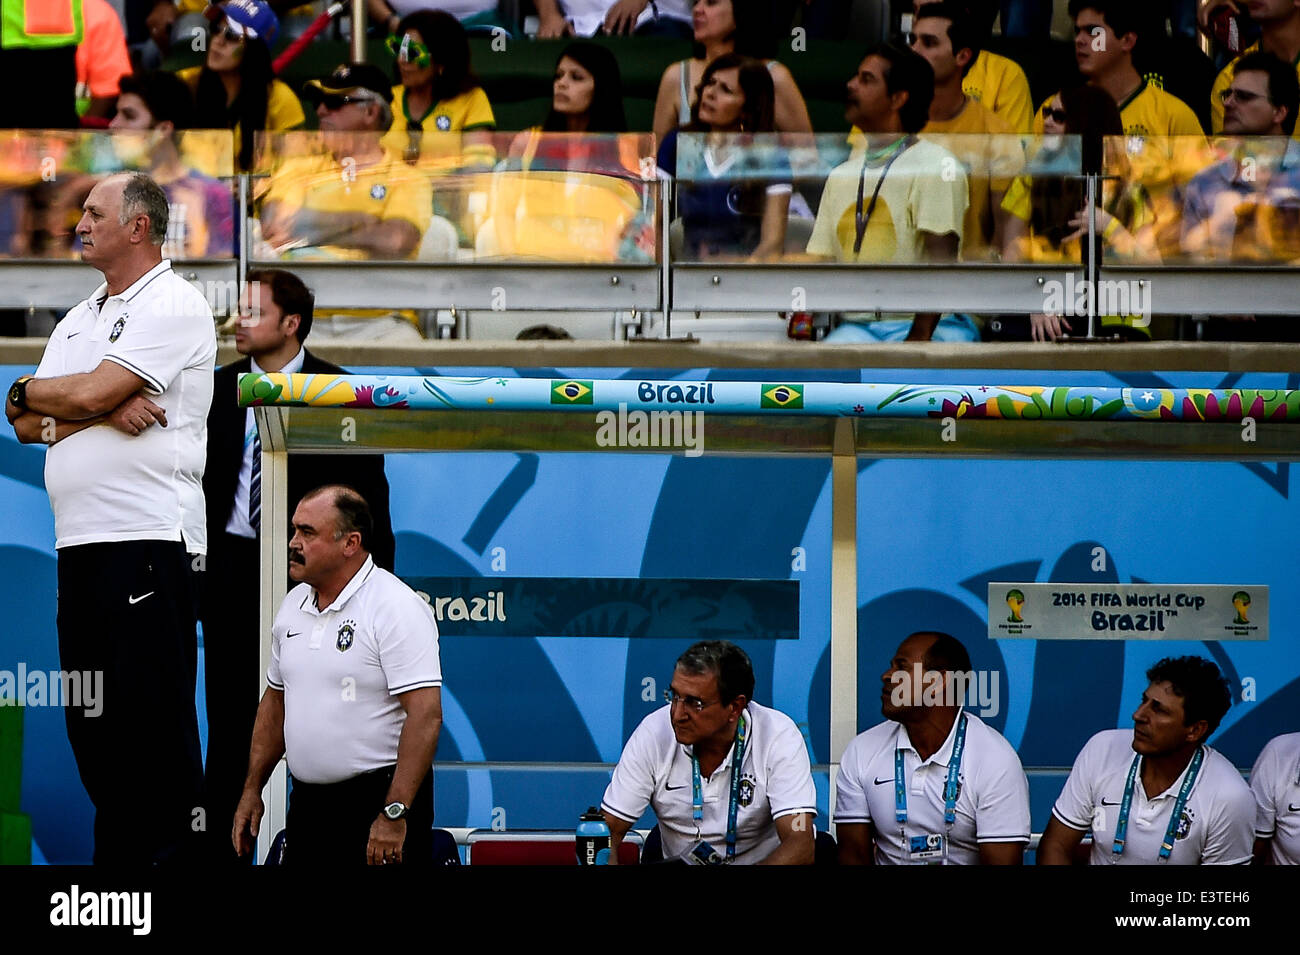 Belo Horizonte, Minas Gerais, Brazil. 28th June, 2014. Brazil's staff, from left to right: Luiz Felipe Scolari, Murtosa, Carlos Alberto Parreira, at the match #49, for the Round of 16, of the 2014 World Cup, between Brazil and Chile, this saturday, June 28th, in Belo Horizonte Credit:  Gustavo Basso/NurPhoto/ZUMAPRESS.com/Alamy Live News Stock Photo